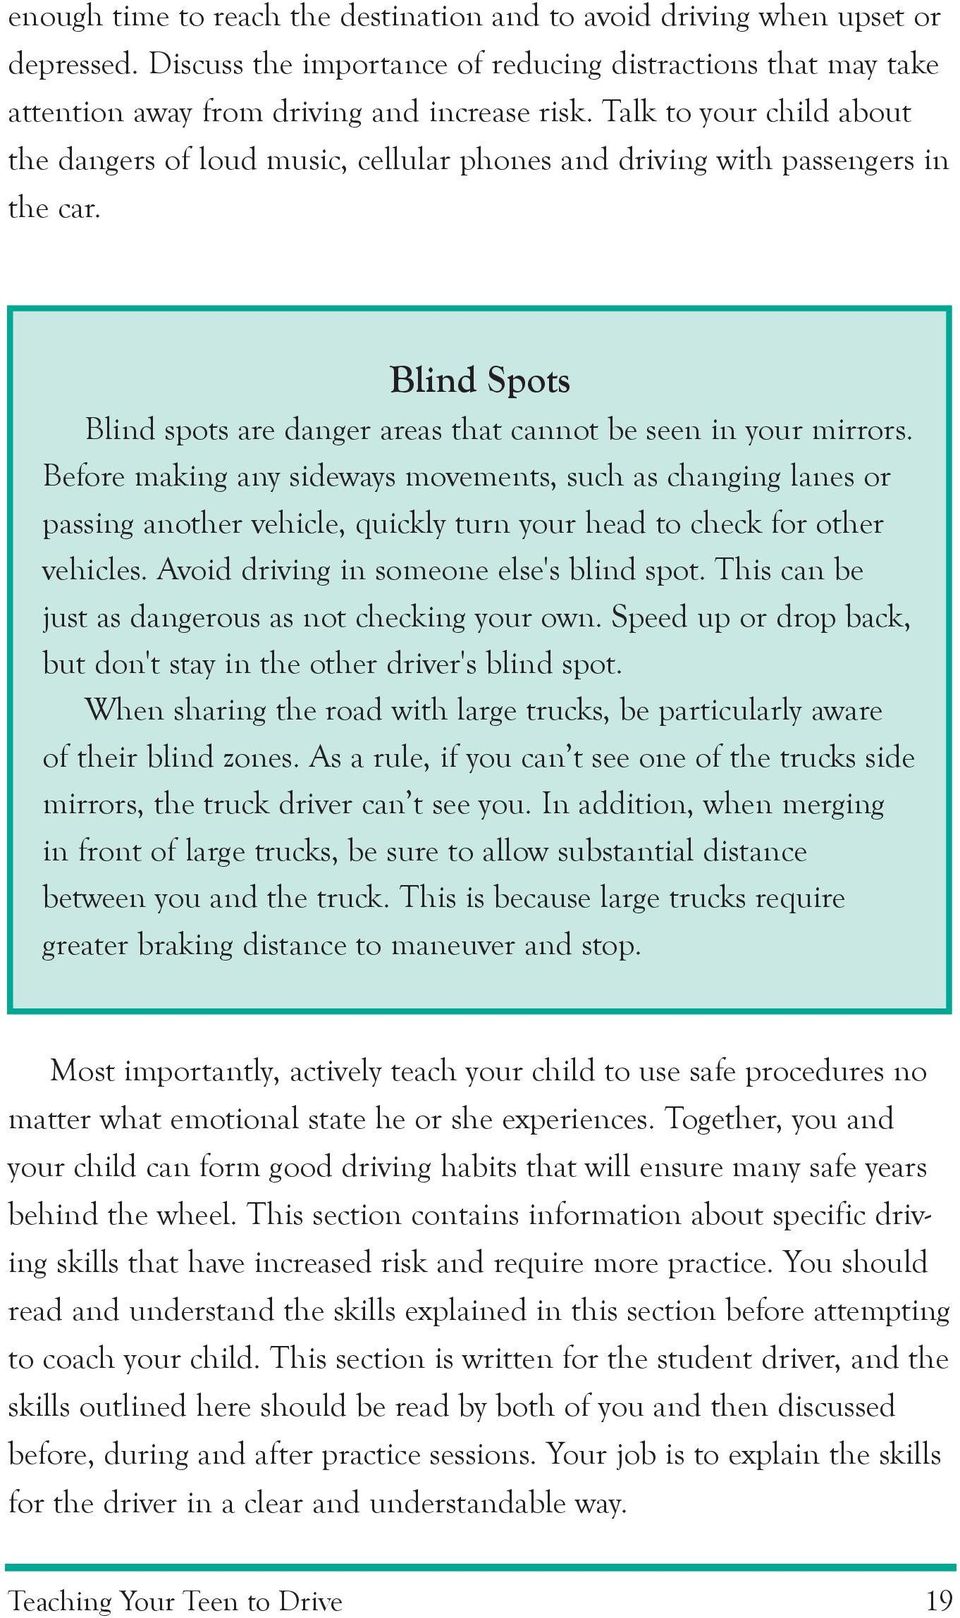 Before making any sideways movements, such as changing lanes or passing another vehicle, quickly turn your head to check for other vehicles. Avoid driving in someone else's blind spot.